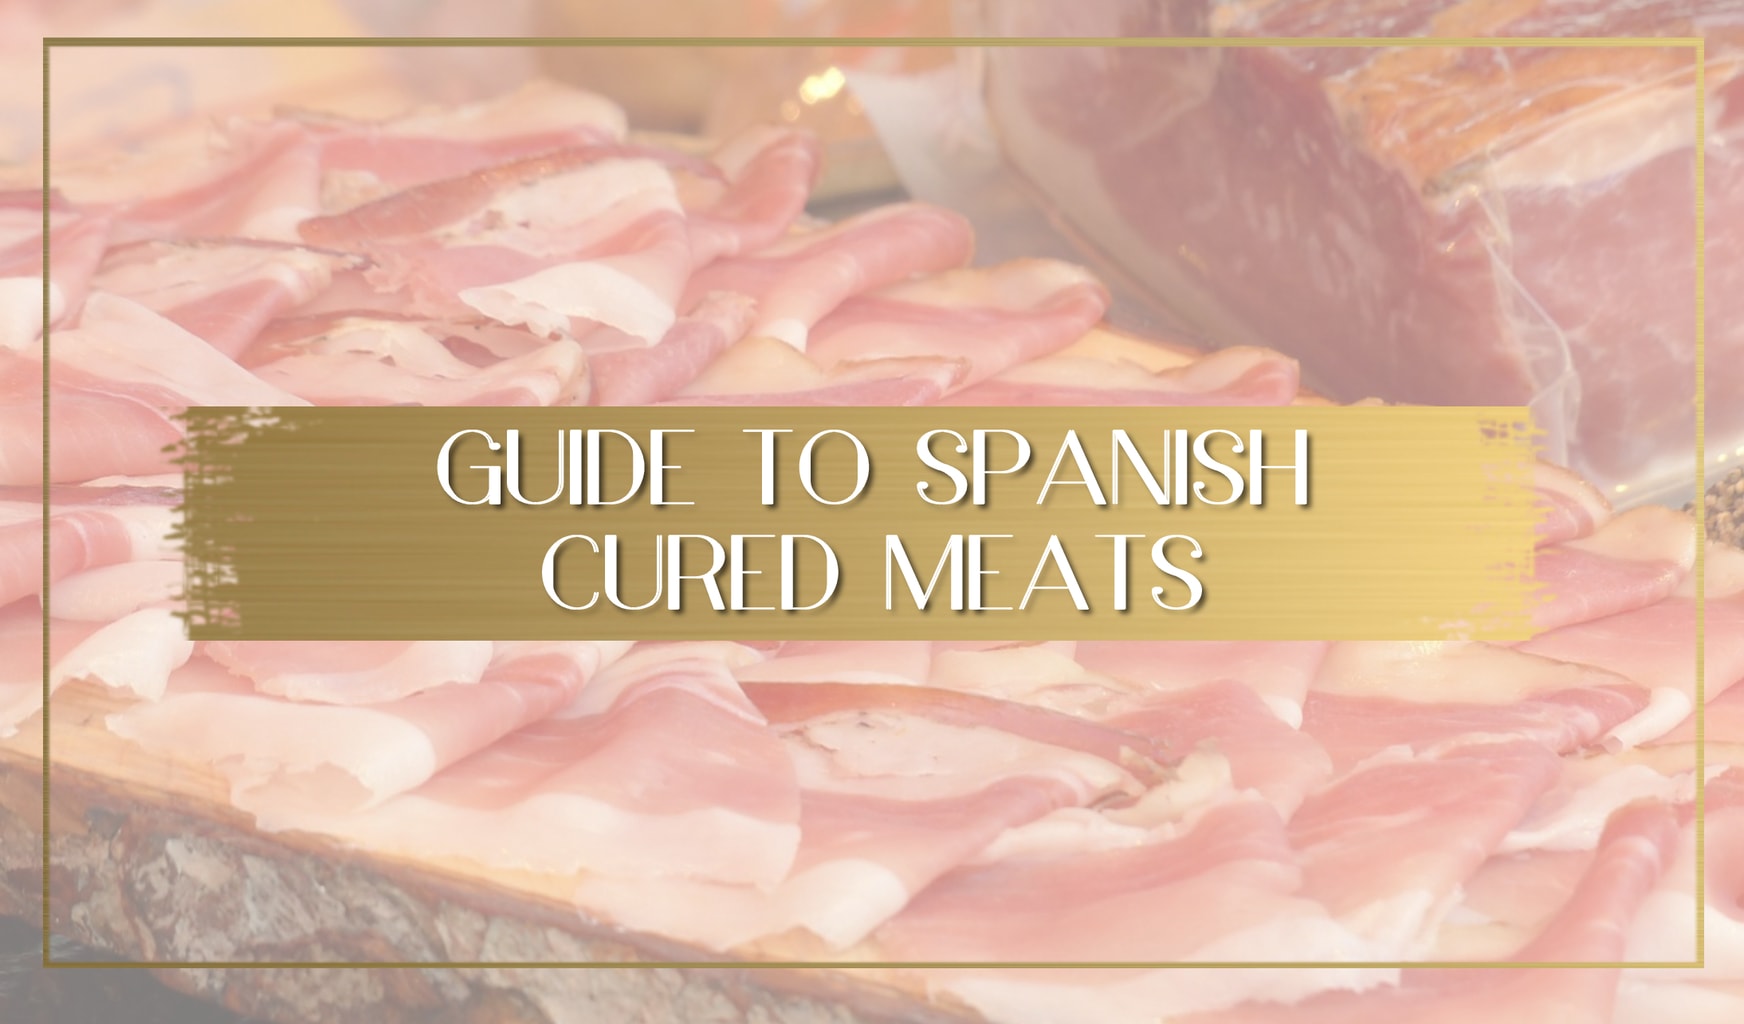 Guide to Spanish cured meats main